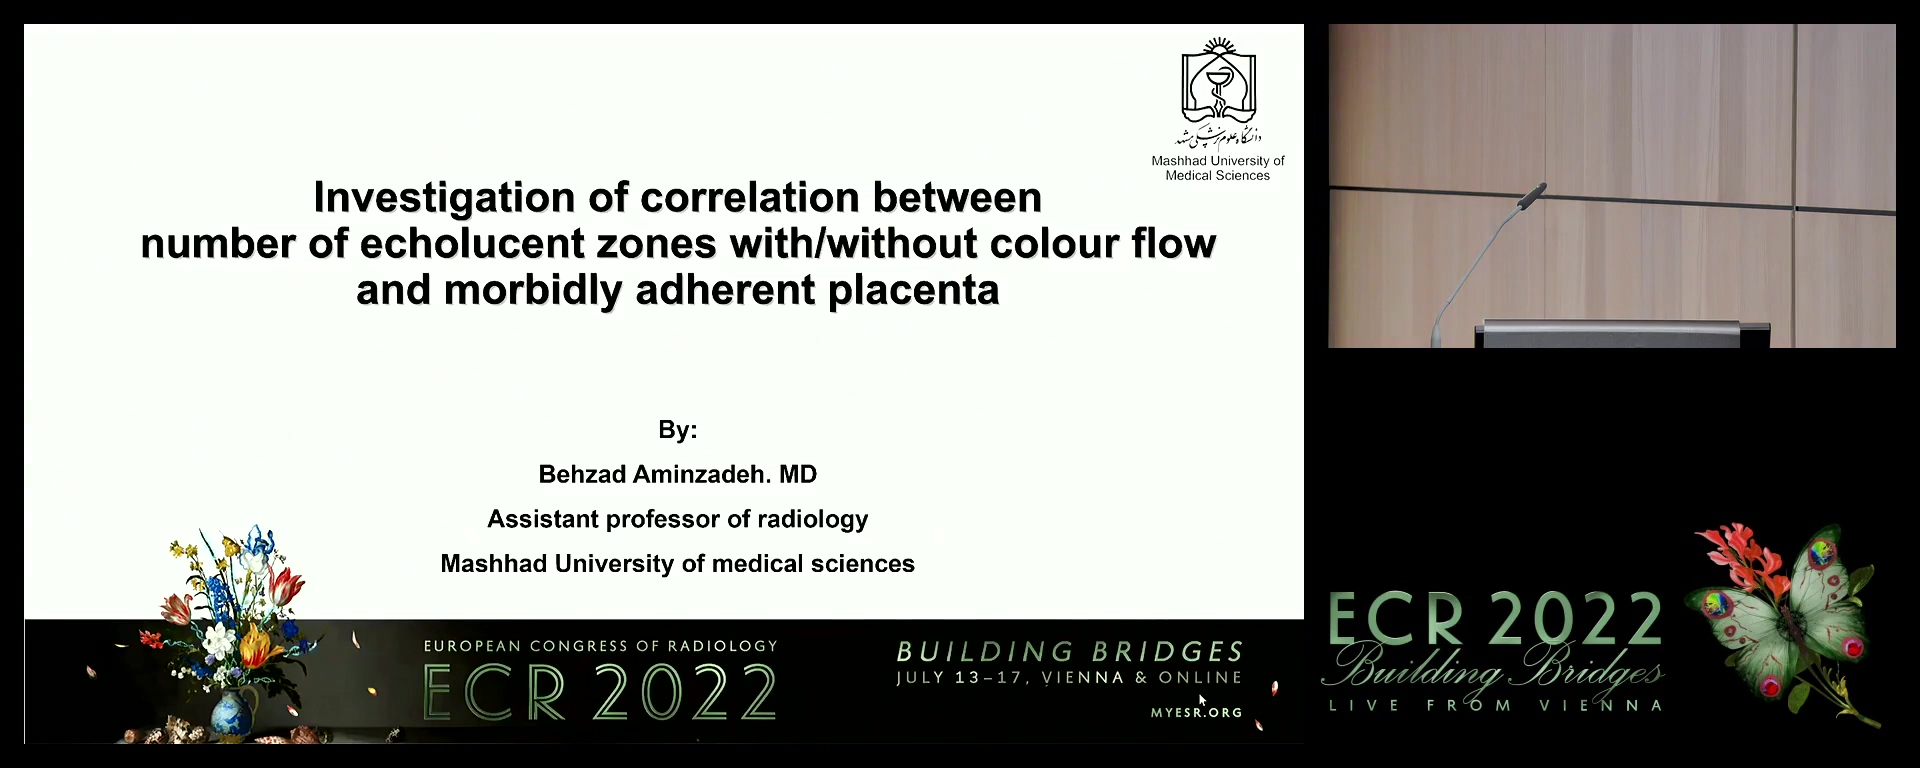 Investigation of correlation between number of echolucent zones with/without colour flow and morbidly adherent placenta